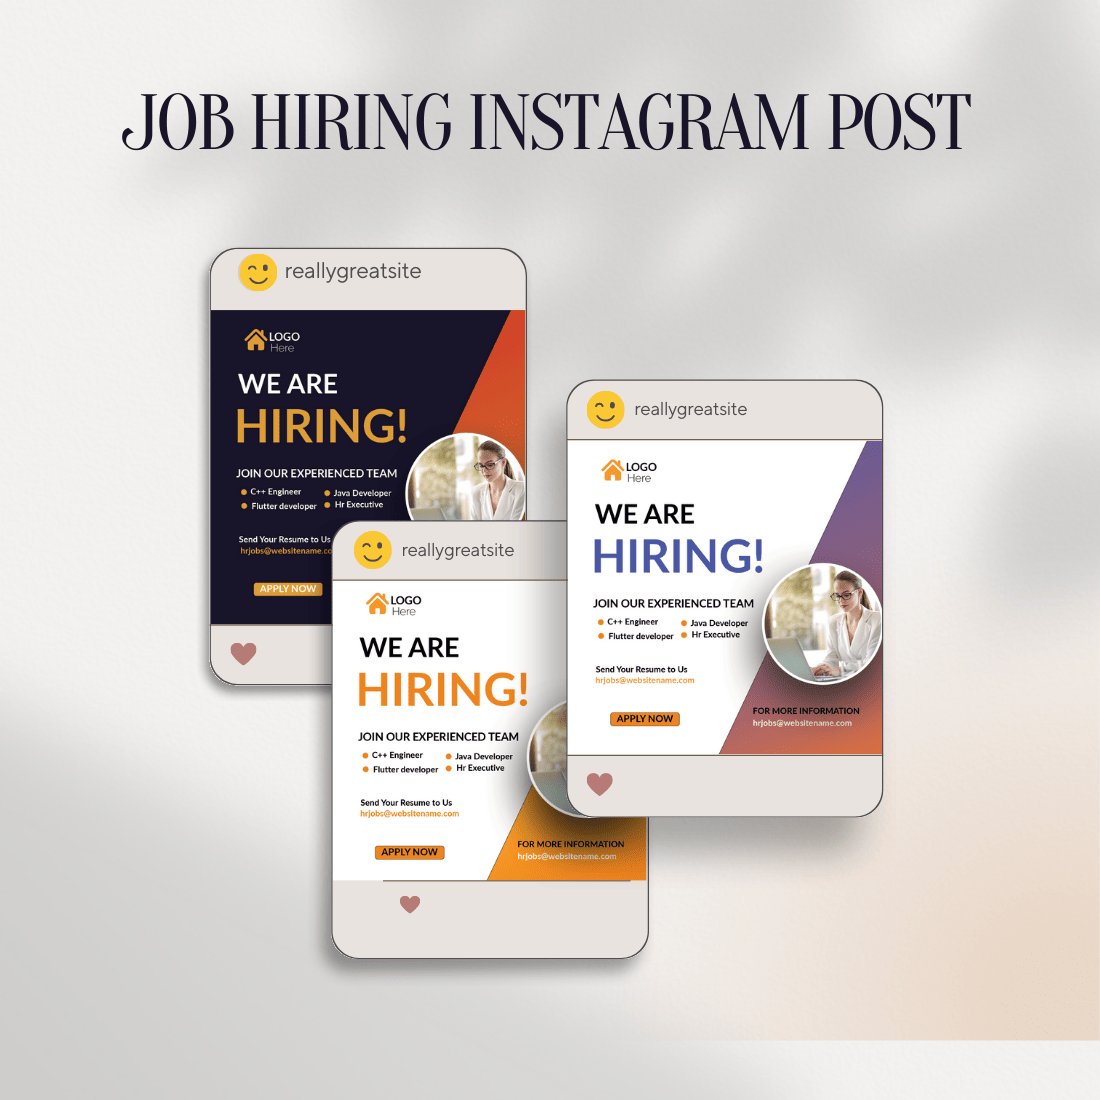 We are hiring employee job social media banner post template cover image.